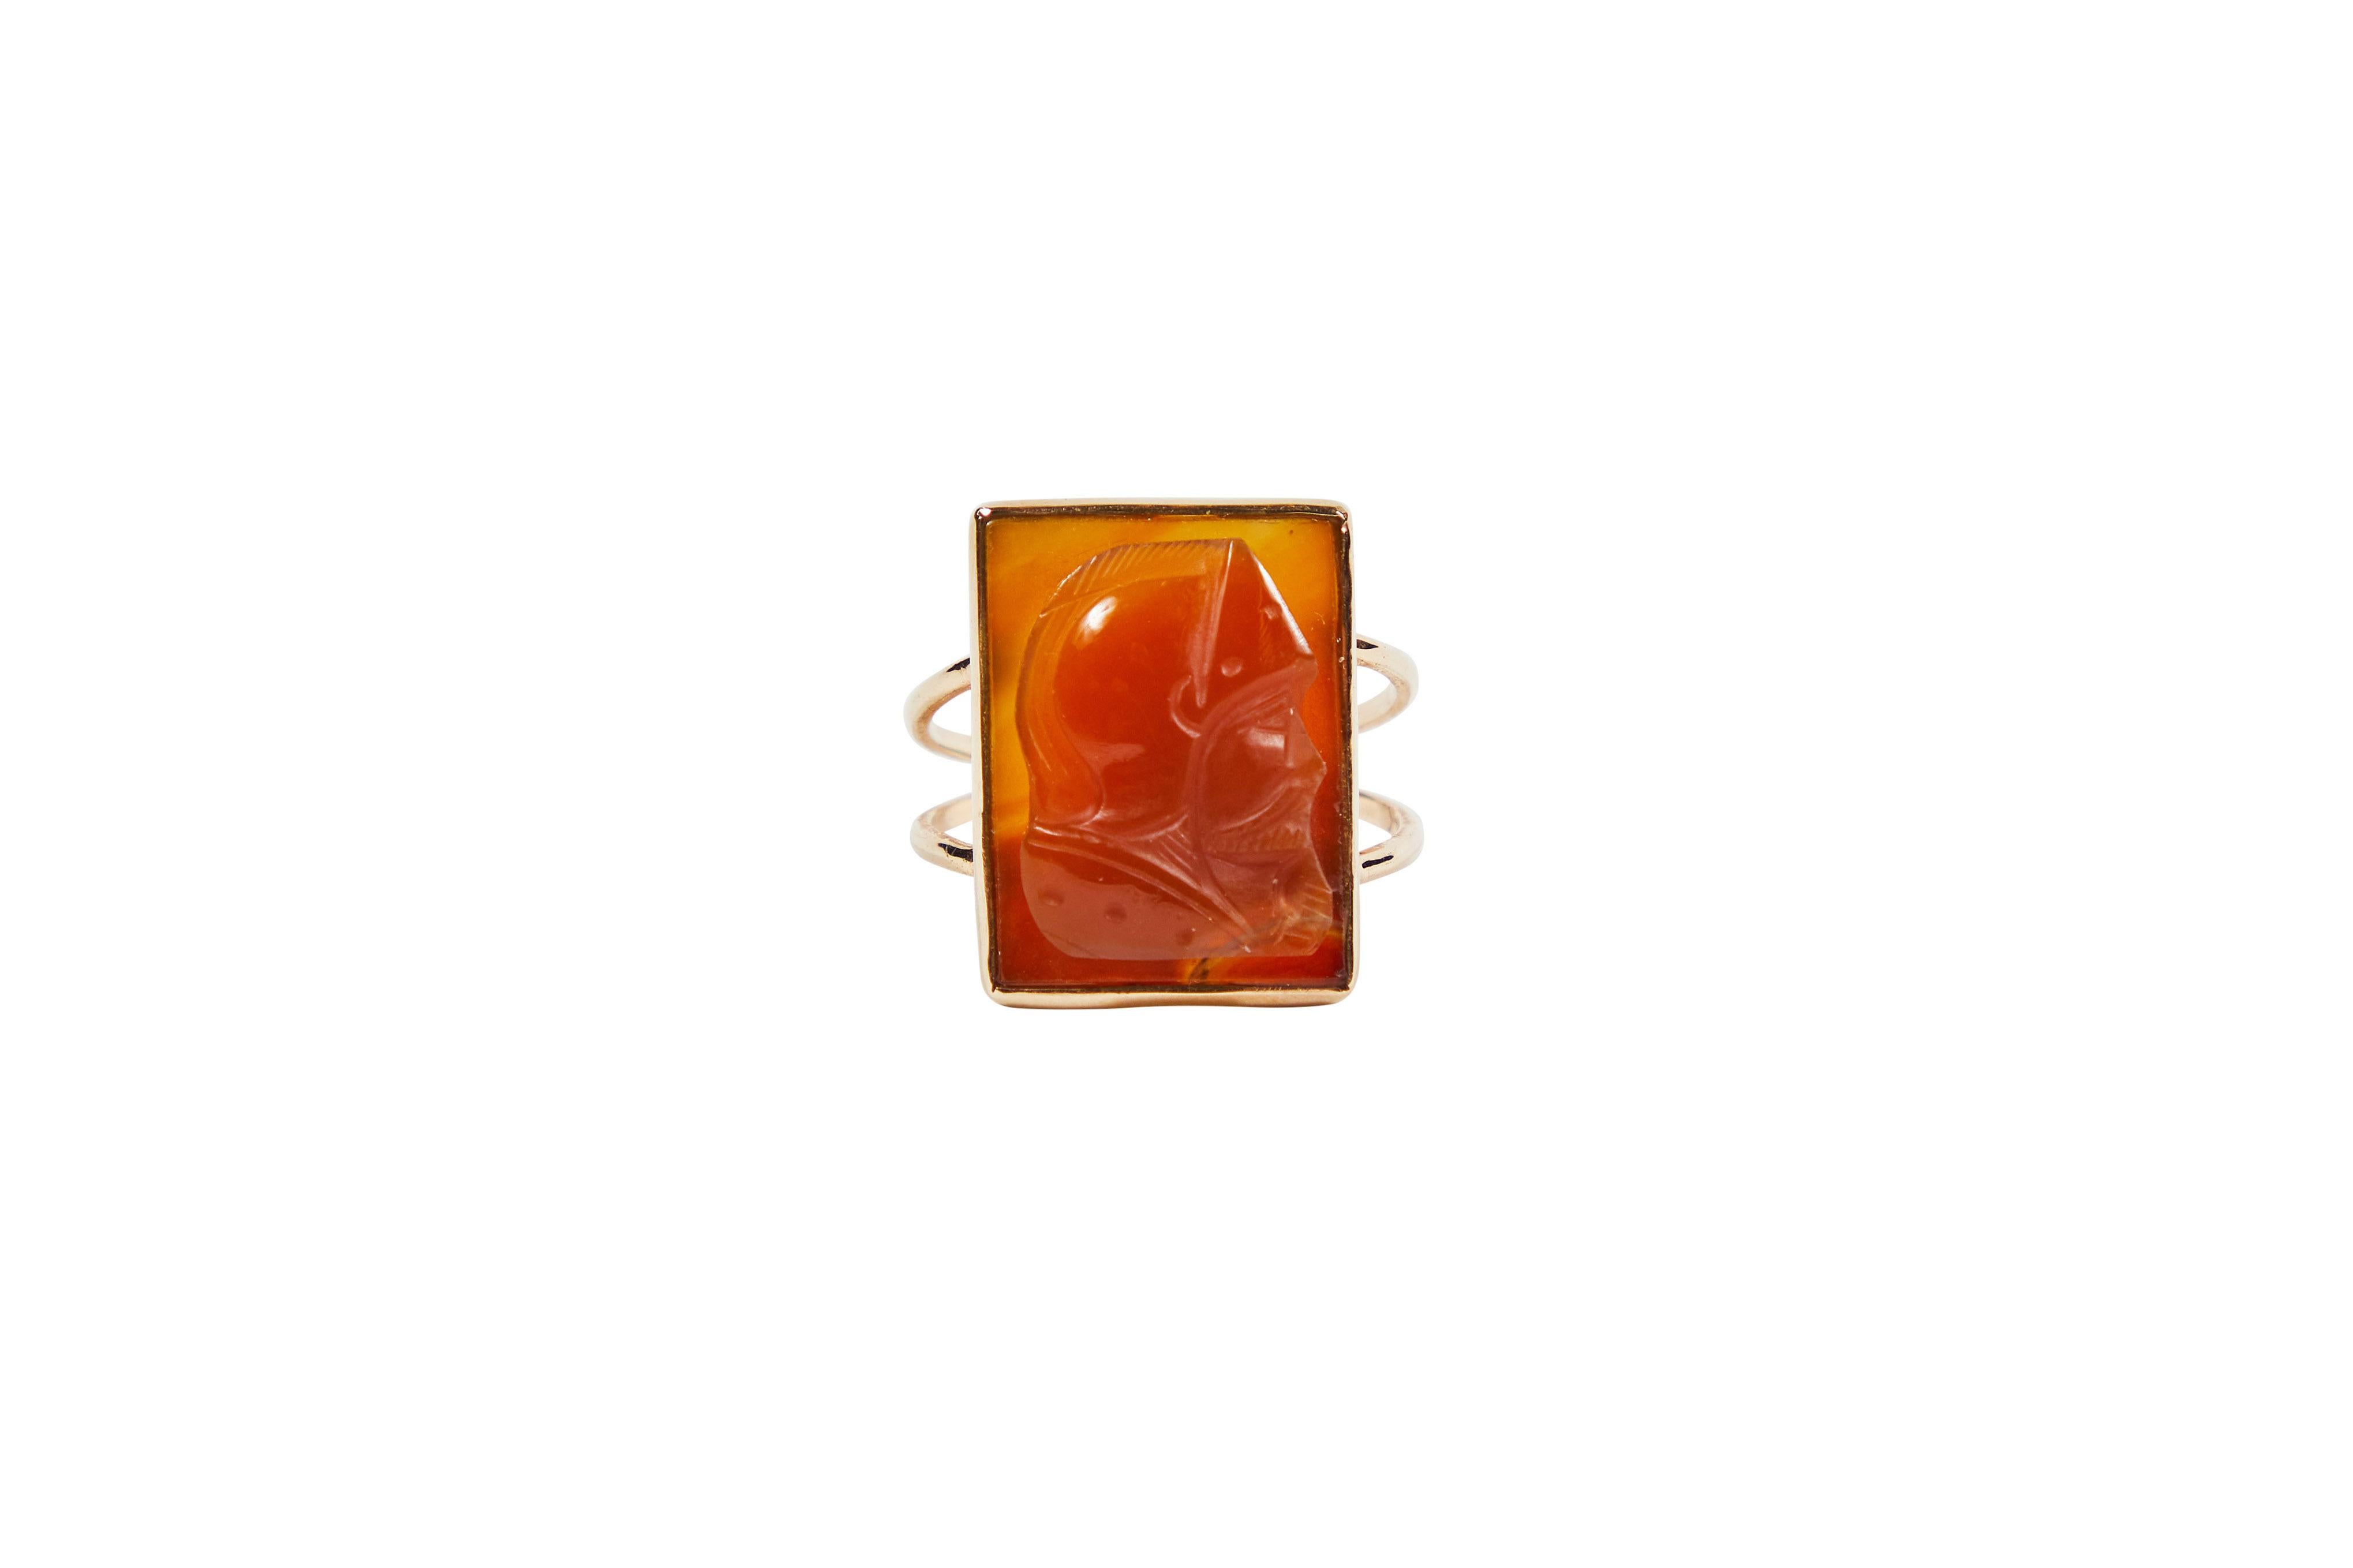 Handsome rectangular carved carnelian cameo ring made from a vintage cuff links now set in a new 14KT gold setting. Carving is of a bearded knight in helmet.

Size 7